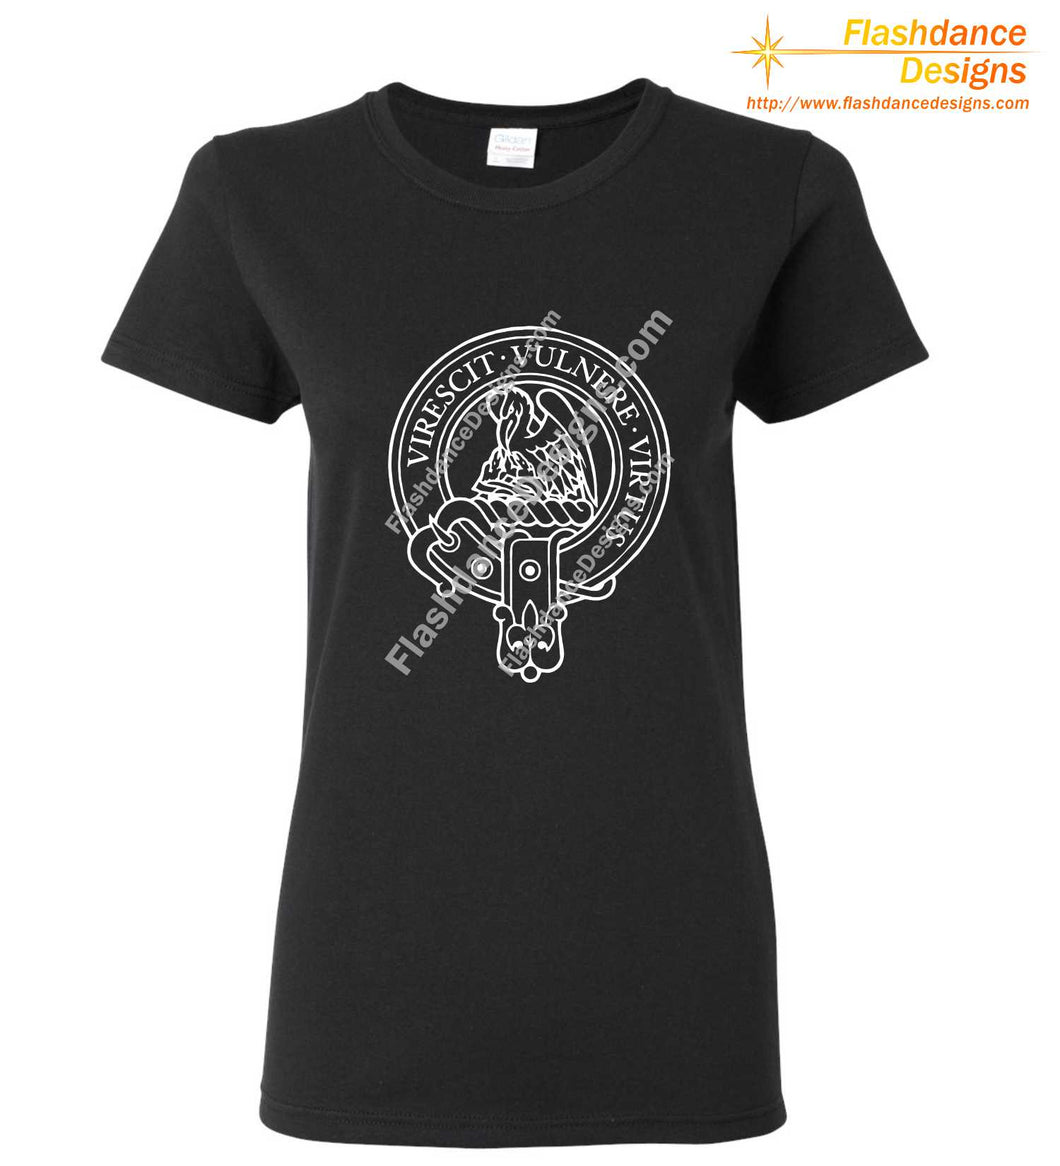 Scottish Clan Crest heavy cotton tee in a ladies' fit, showing the Stewart crest in white on a black shirt. Other available clans include Akins, Cambell, Comyn, Cumming, Farquharson, Fraser, MacGregor, MacKinnon, MacKintosh, Macmillan, Montgomery and Ramsay.